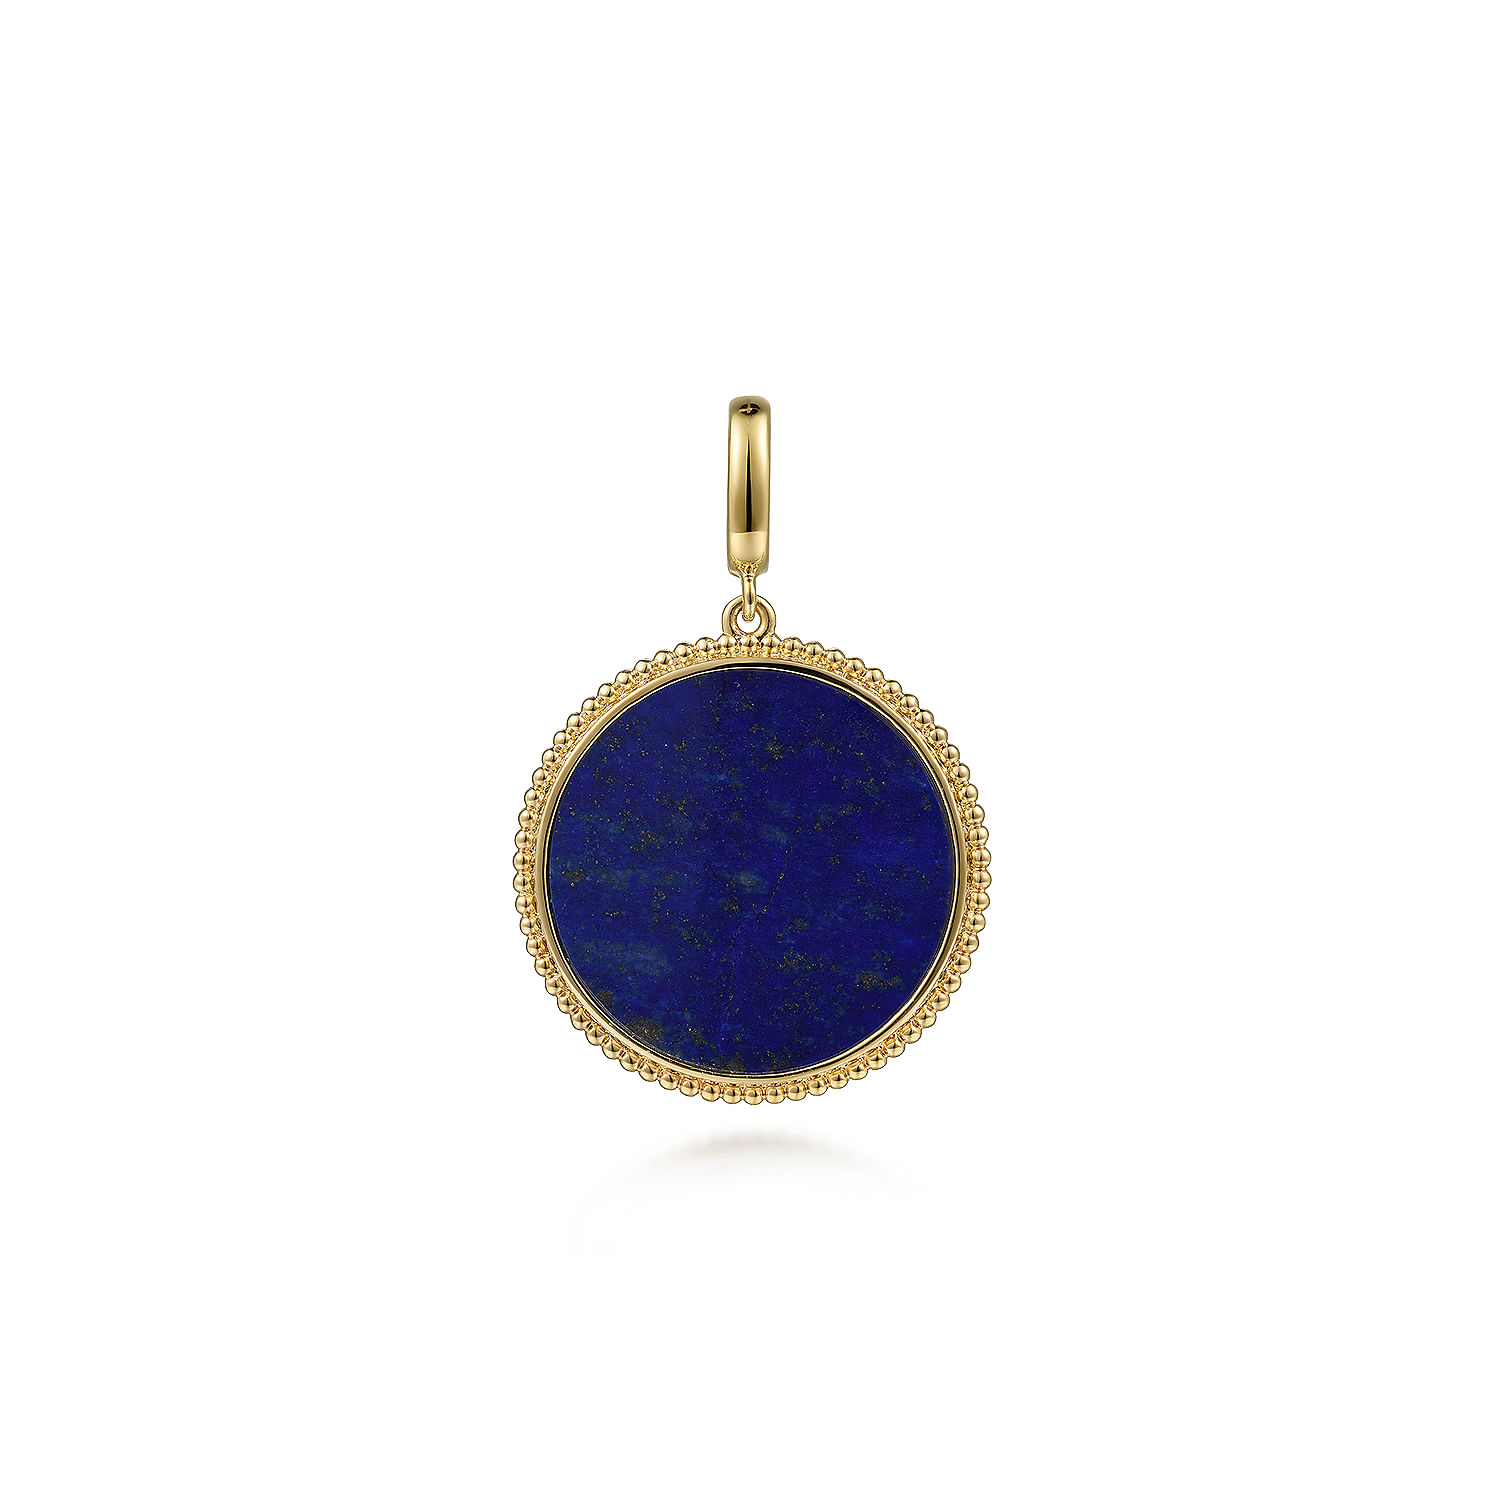 Gabriel - 14K Yellow Gold Round Lapis Inlay Medallion Pendant in size 24mm